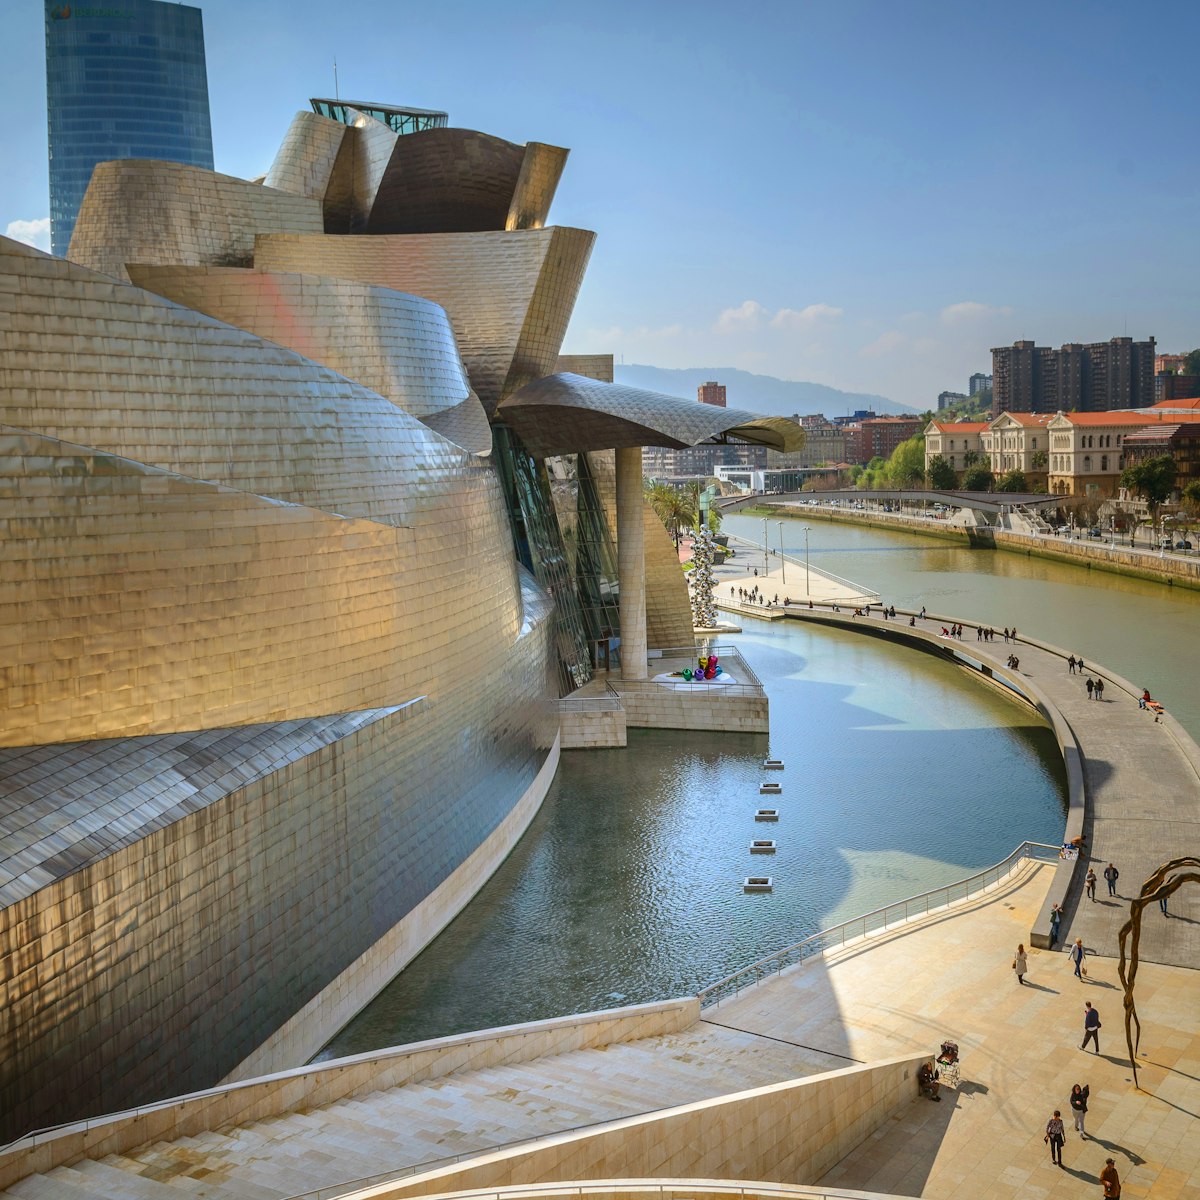 Guggenheim Museum, Bilbao, Spain, Architect Frank Gehry, 1997, Guggenheim Museum Detail Of Curving Titanium Wall. Guggenheim Museum Bilbao is a museum of modern and contemporary art. Built alongside the Nervion River, which runs through the city of Bilbao to the Cantabrian Sea.